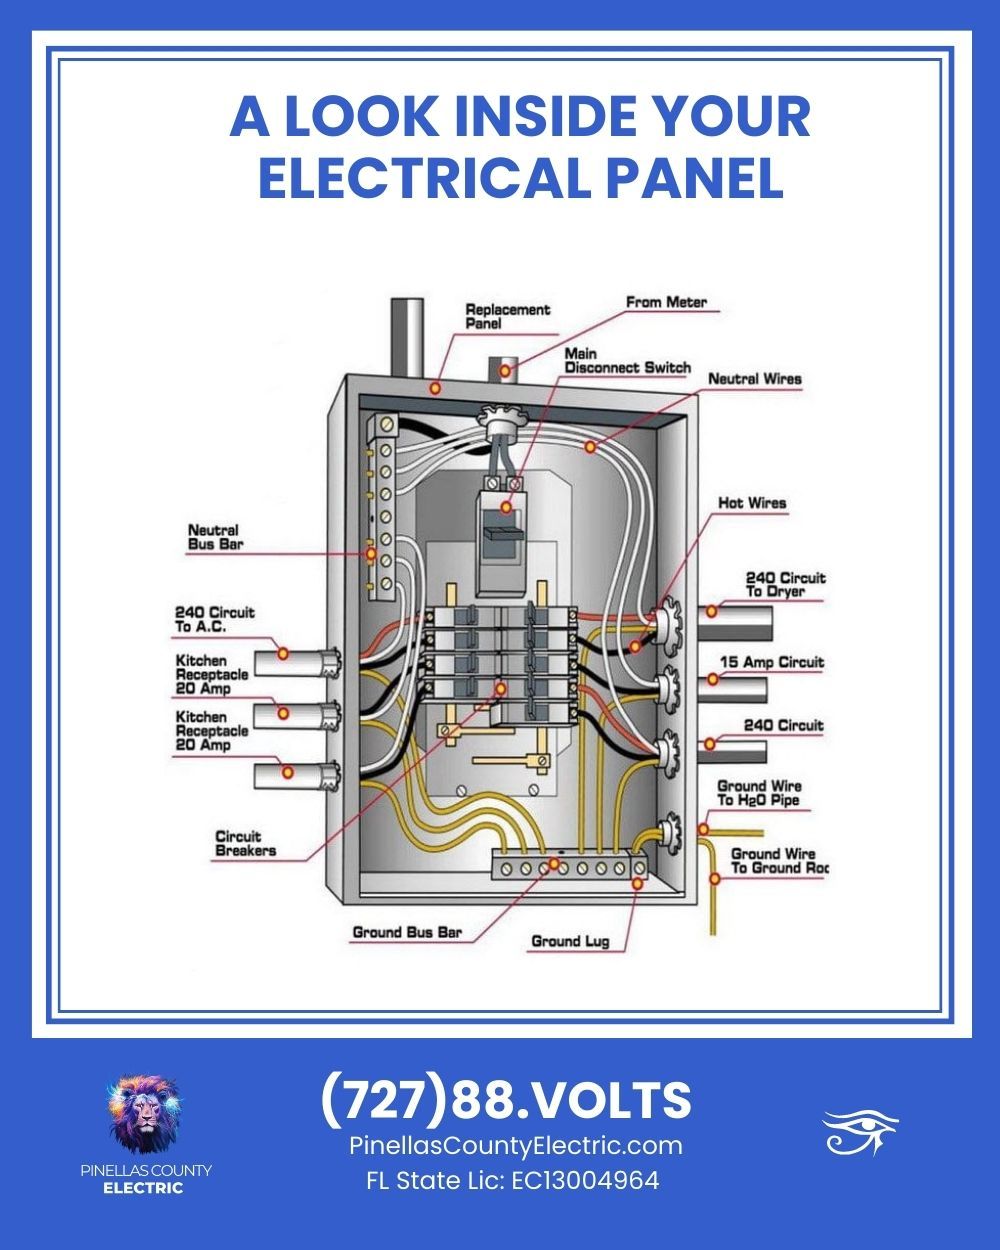 electrical panel guide, electrical panel facts